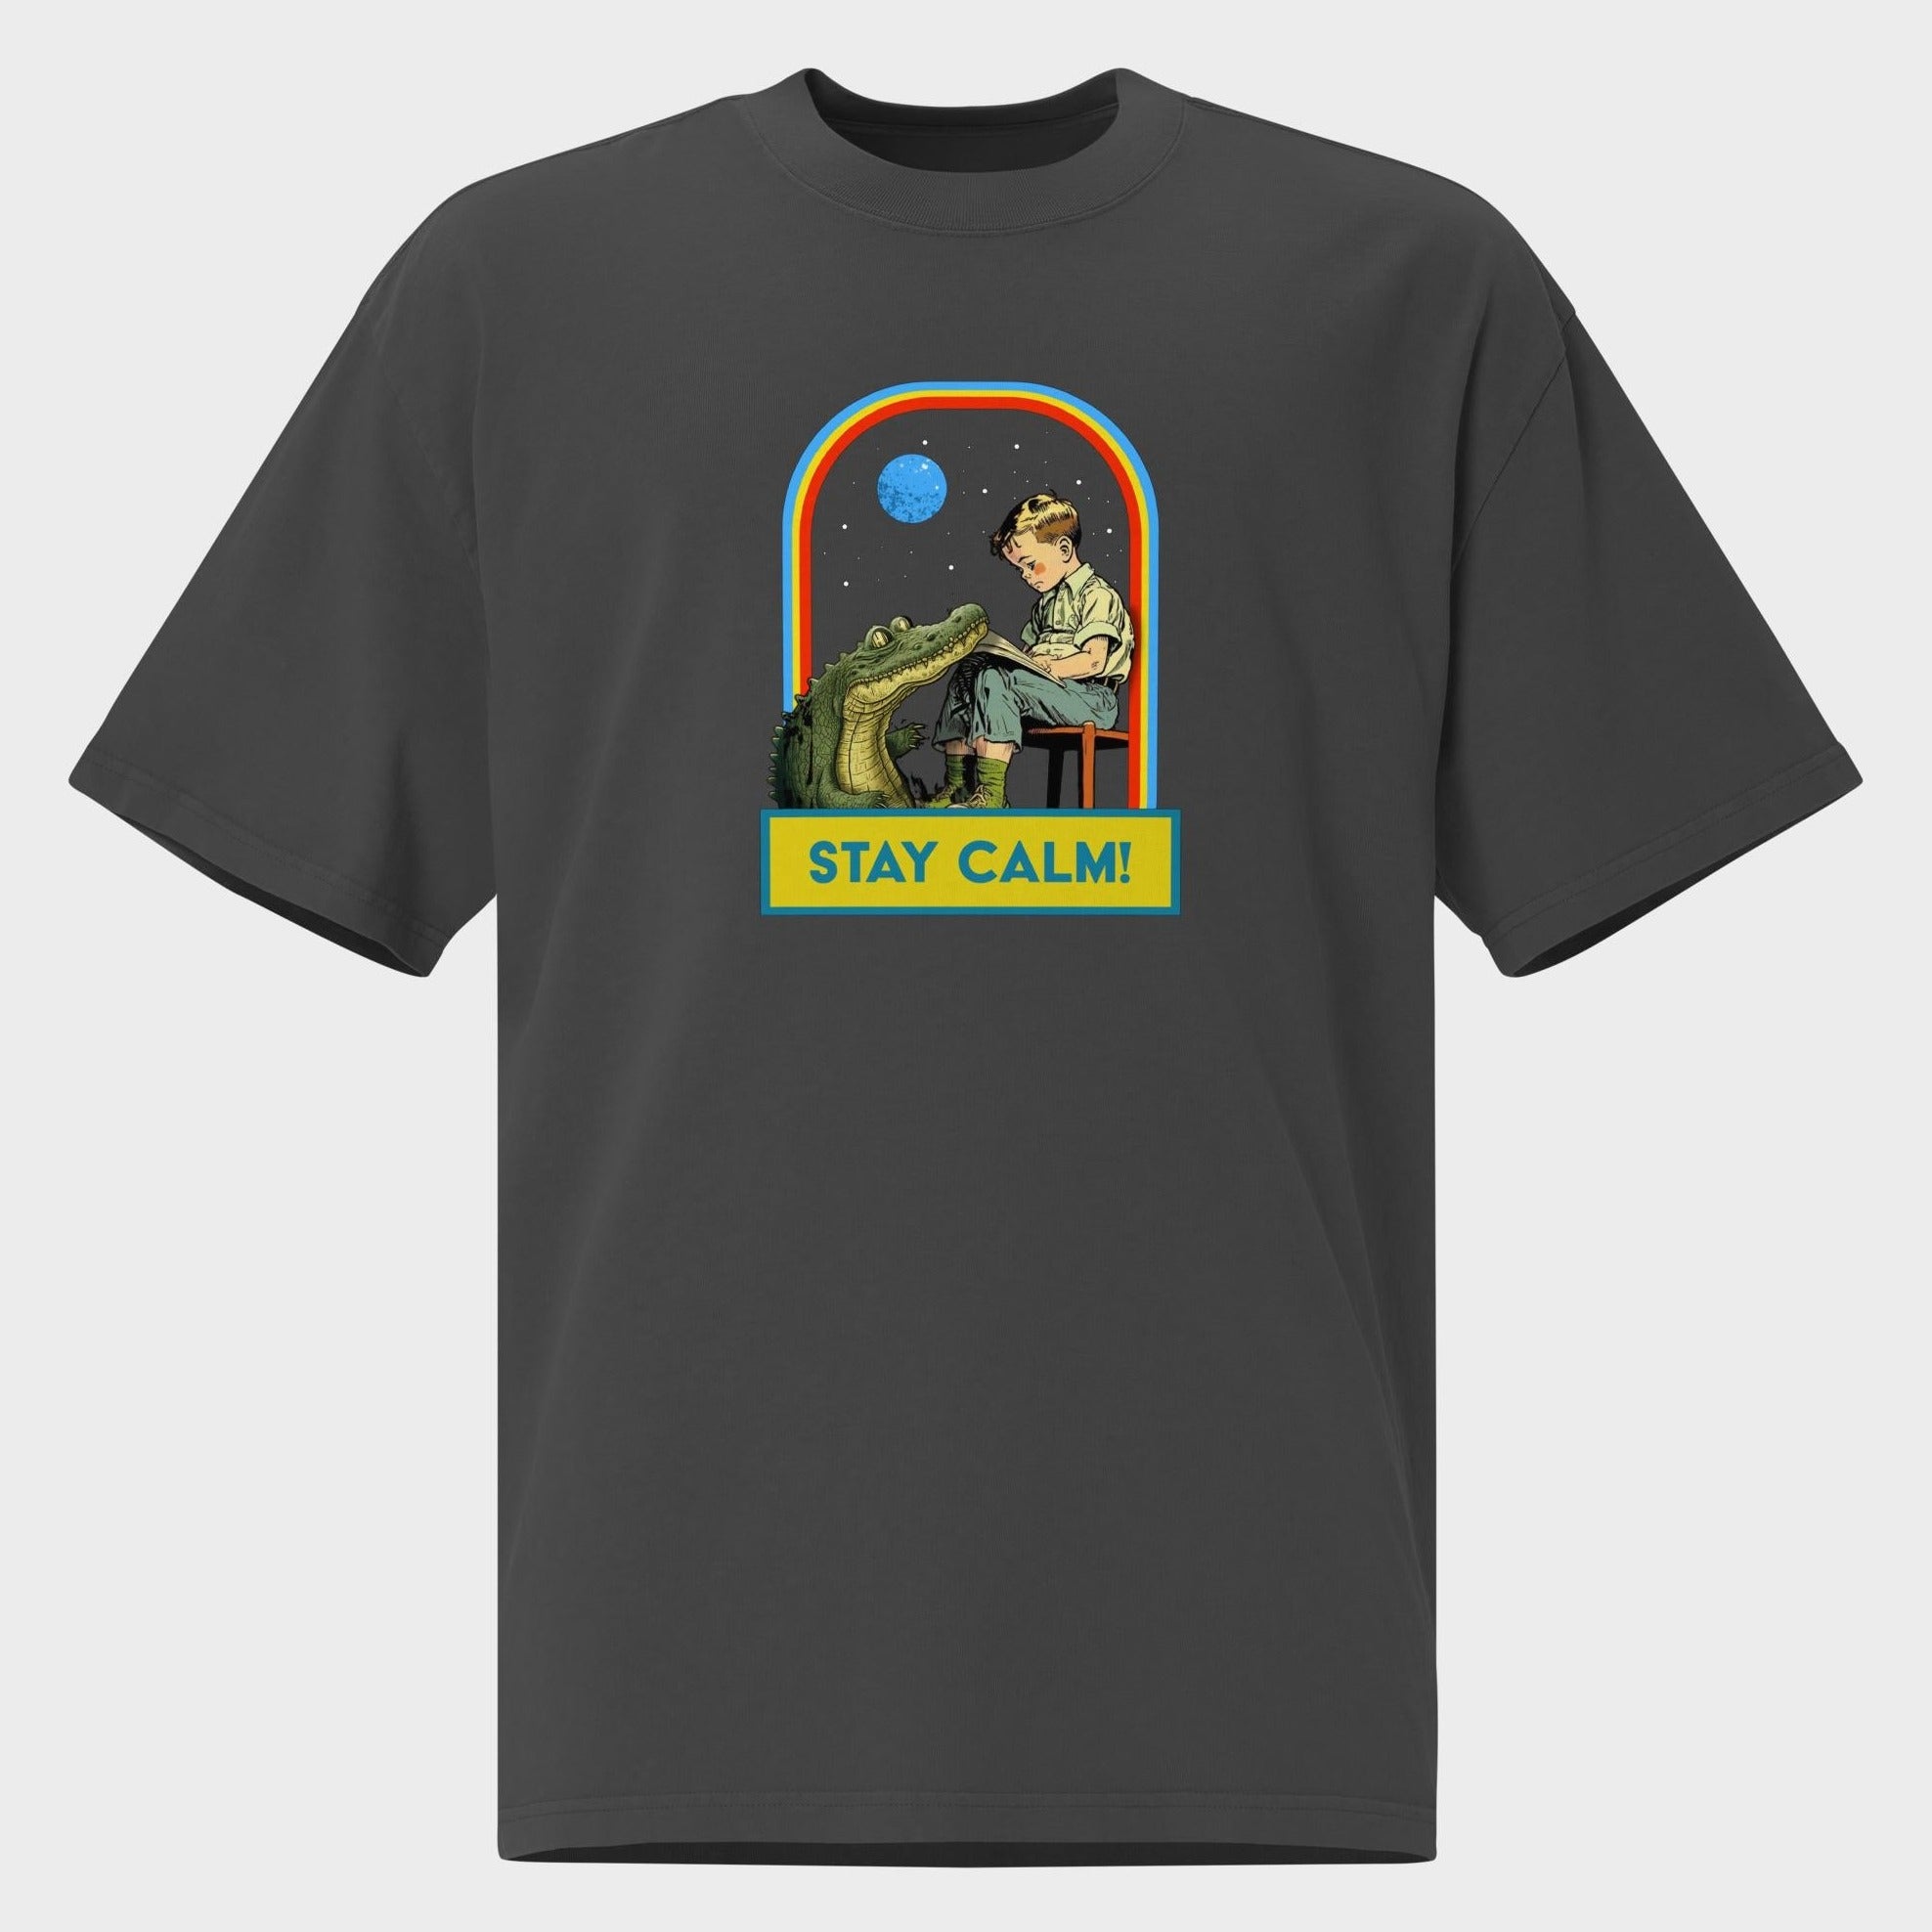 Stay Calm! - Oversized T-Shirt